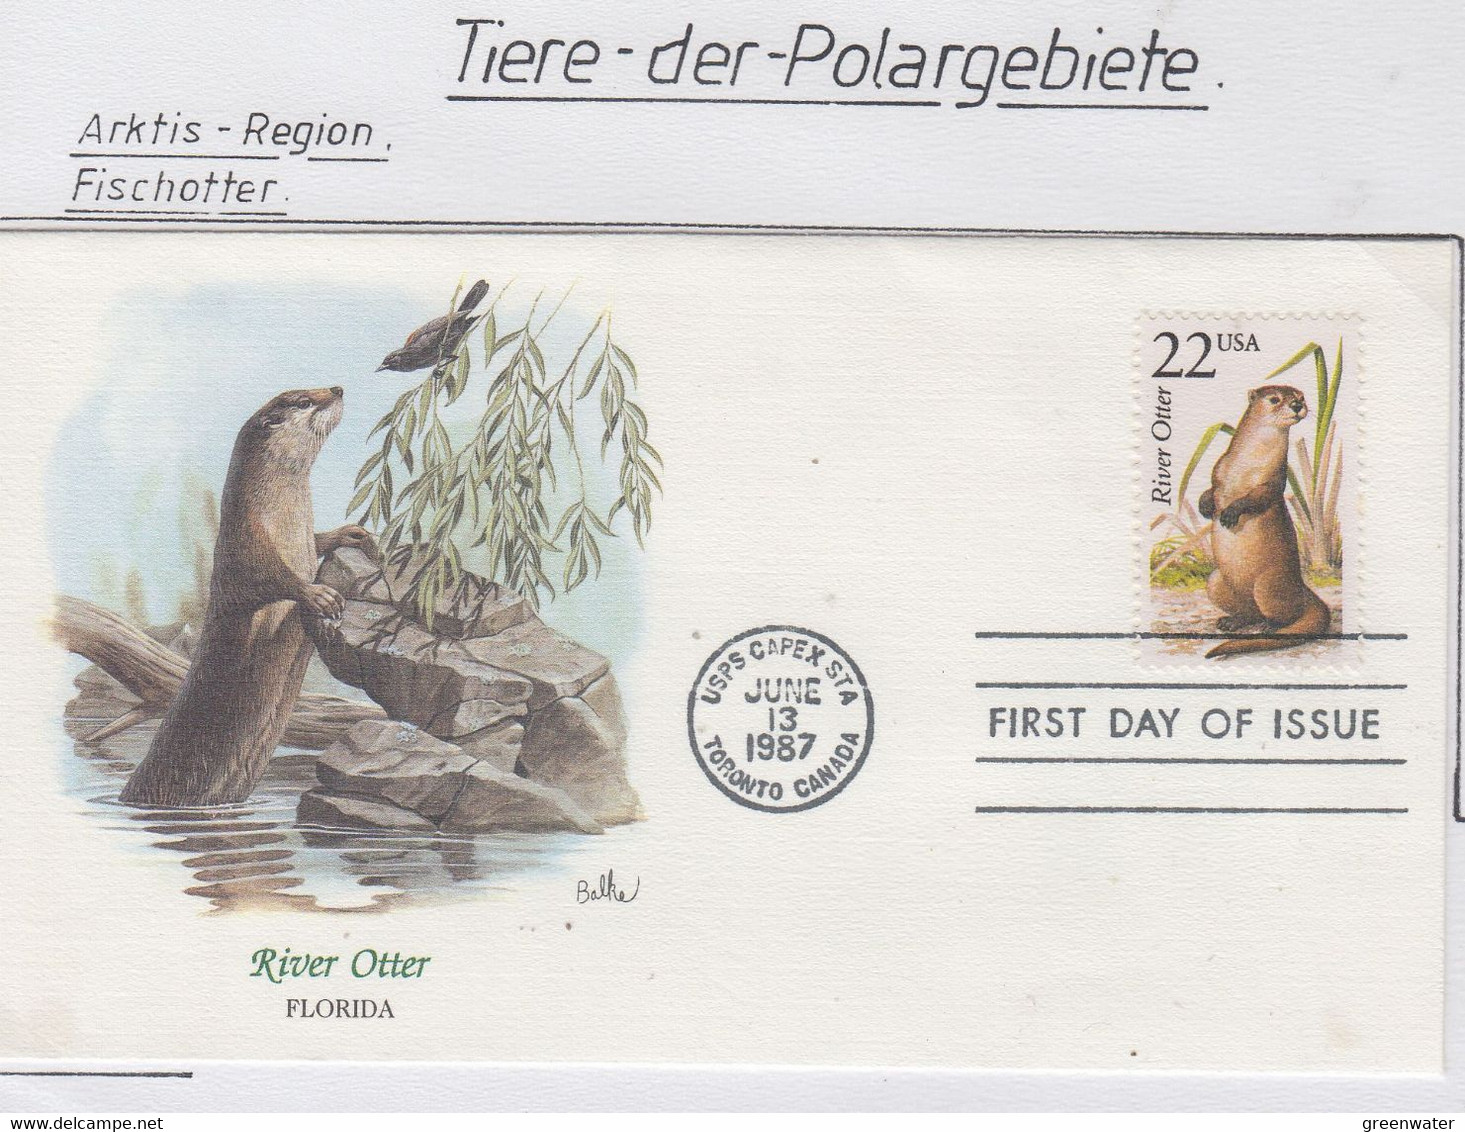 USA 1987 River Otter 1v FDC Capex (AN164) - Arctic Tierwelt